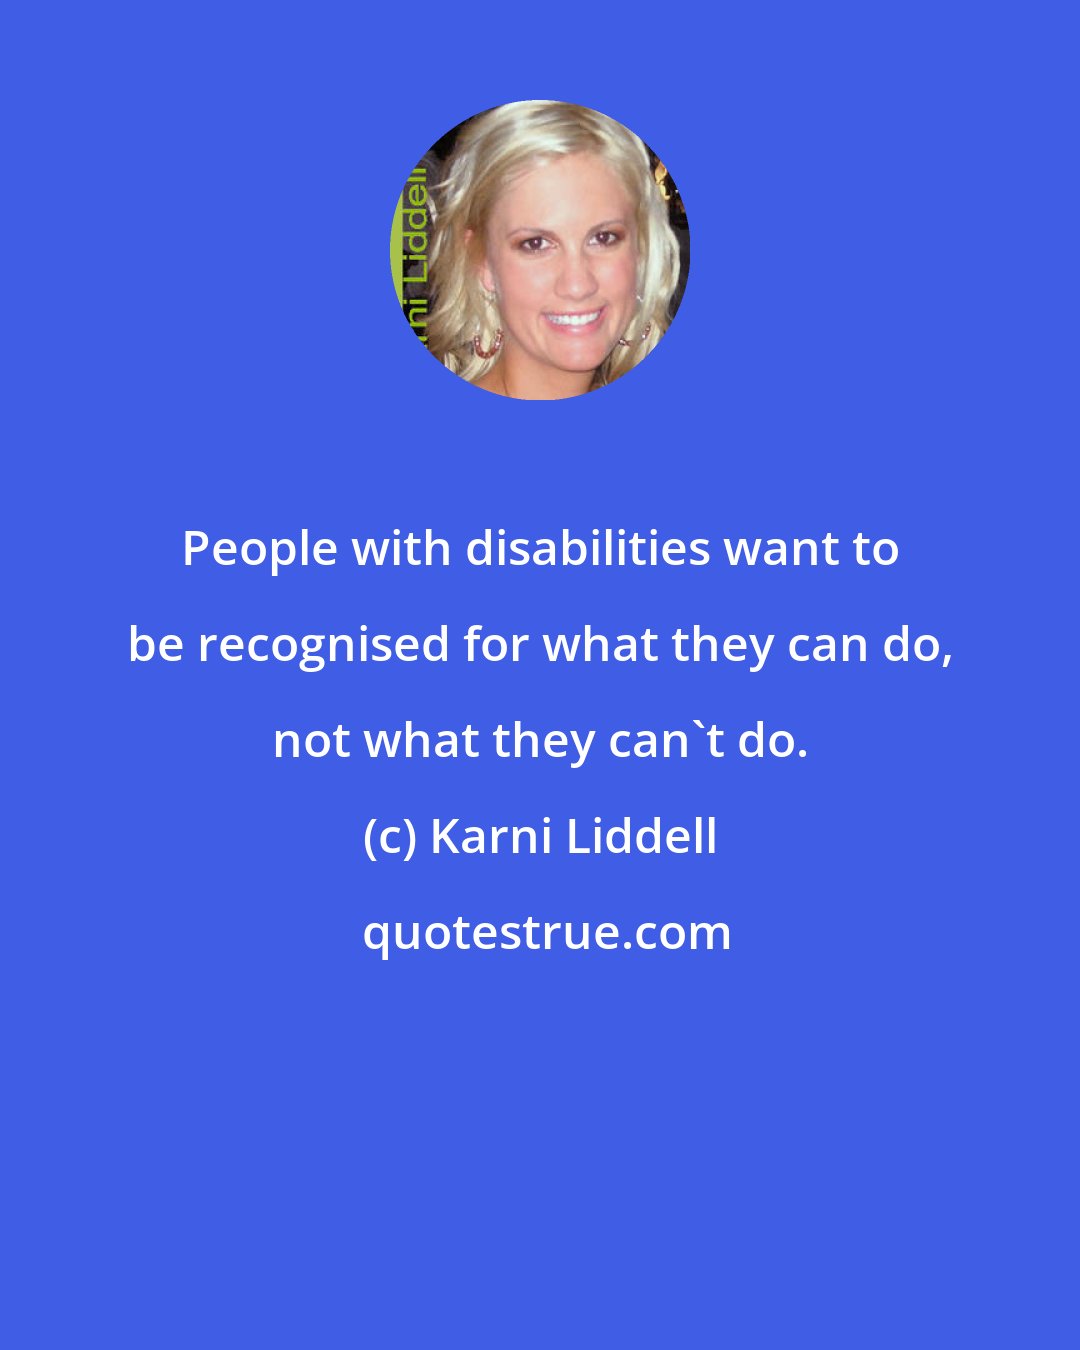 Karni Liddell: People with disabilities want to be recognised for what they can do, not what they can't do.